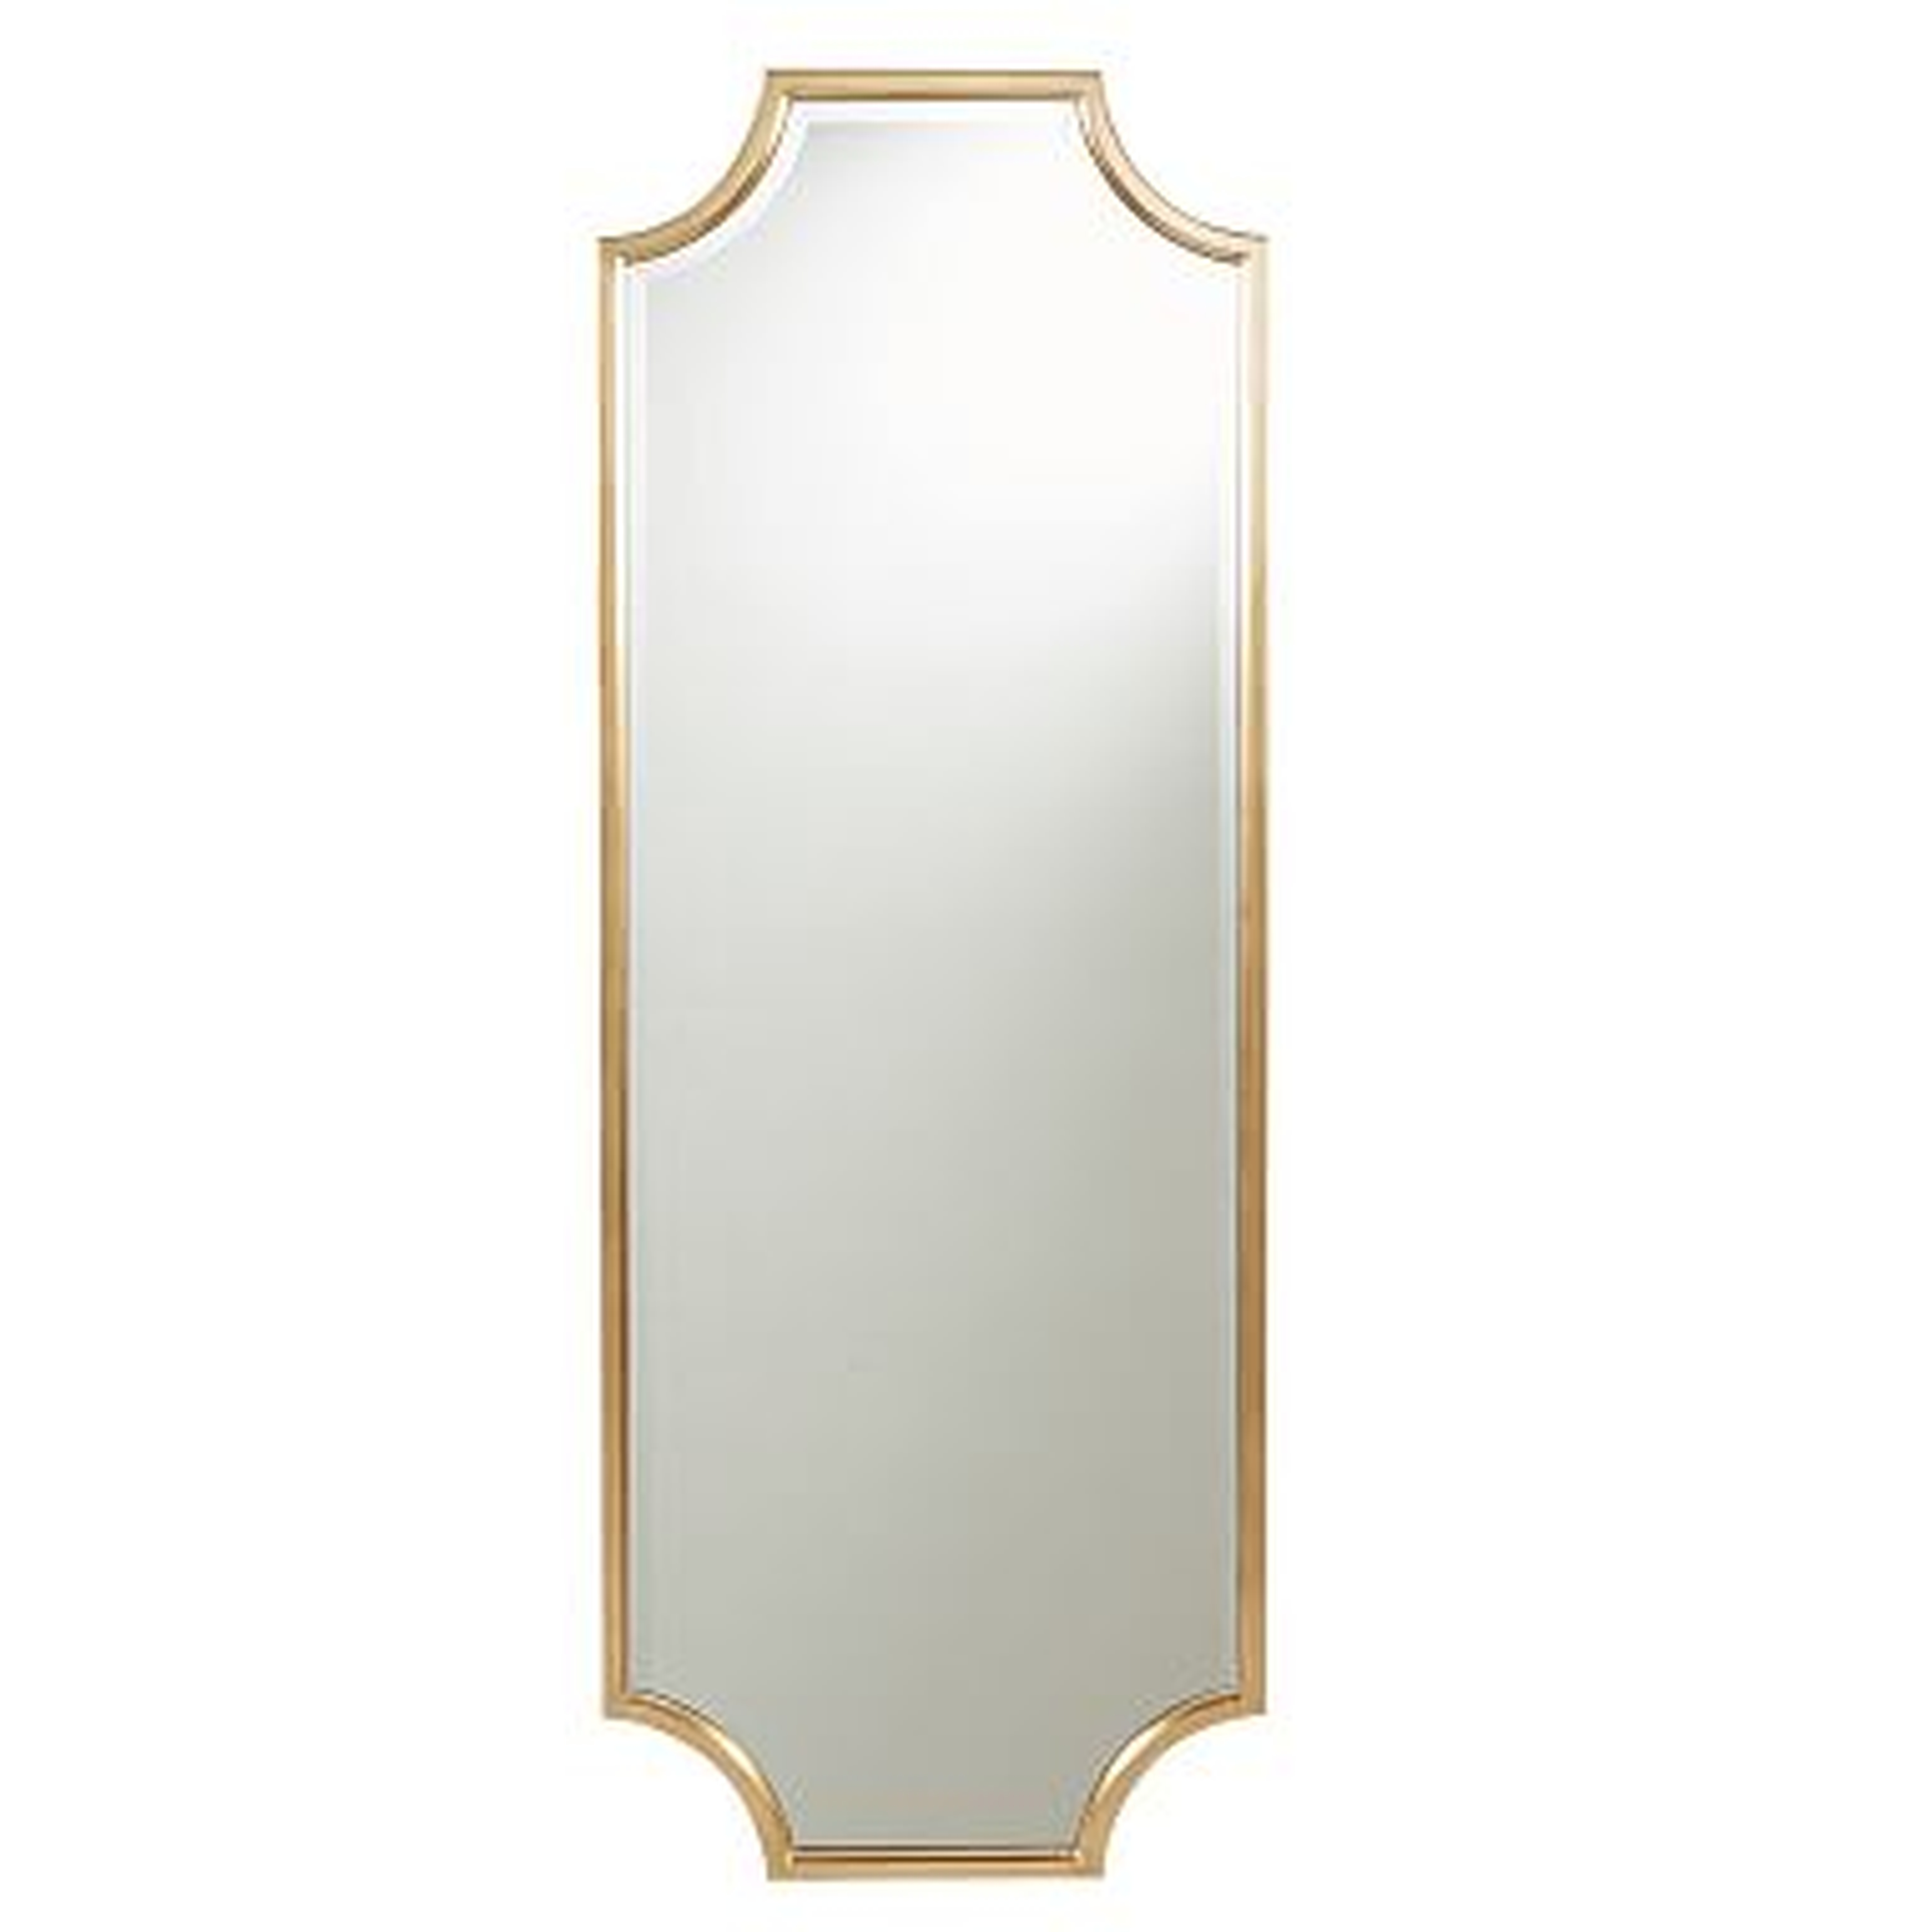 Scallop Leaf Full Length Mirror, Gold, UPS - Pottery Barn Teen